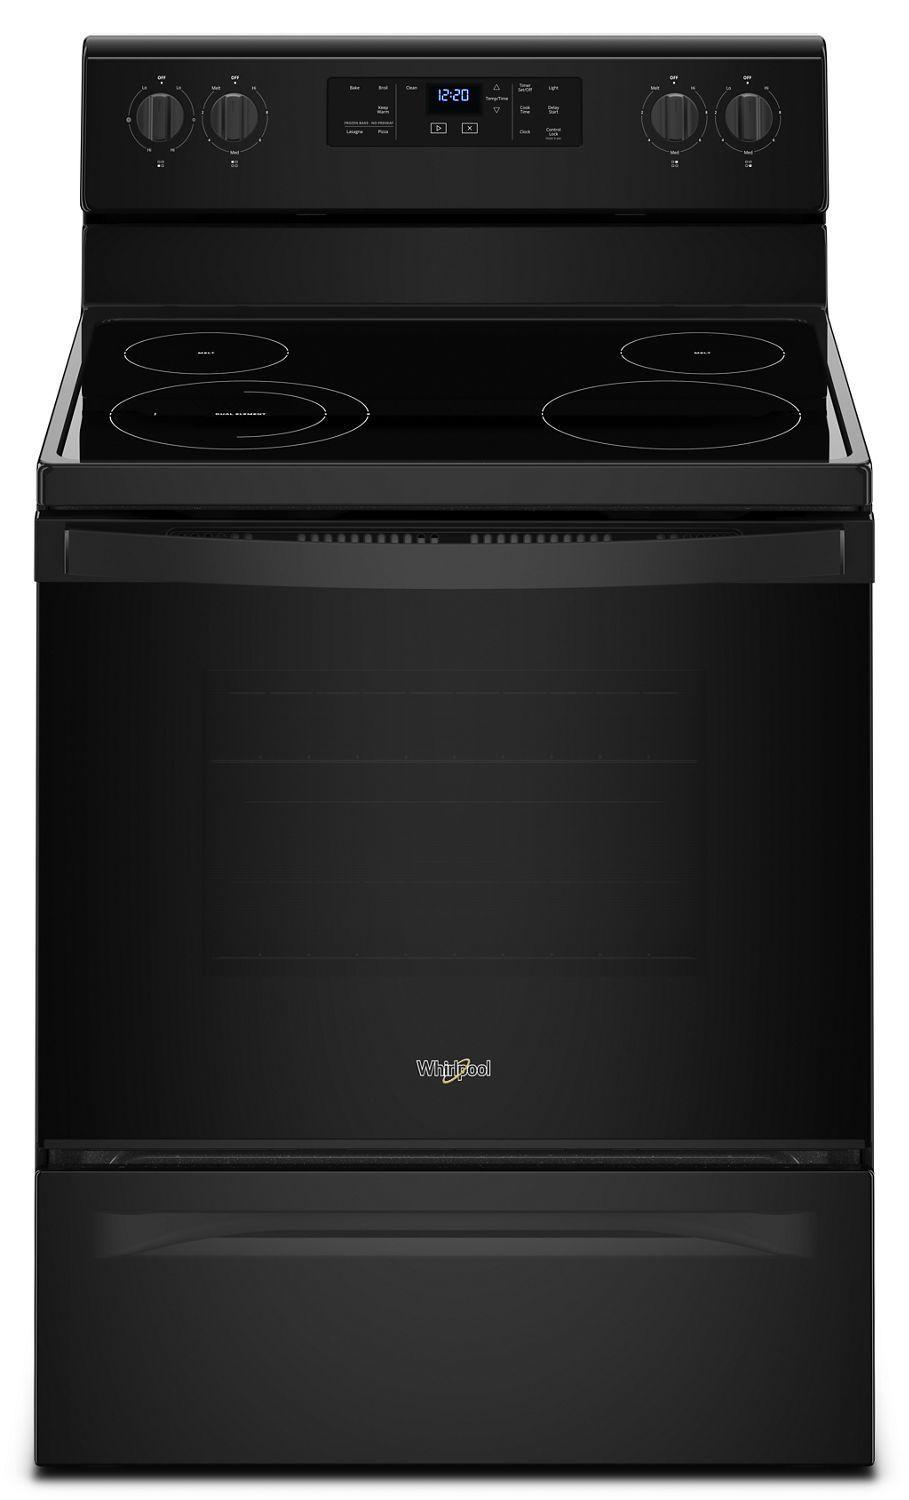 Whirlpool 5.3 cu. ft. Freestanding Electric Range with Adjustable Self-Cleaning Black